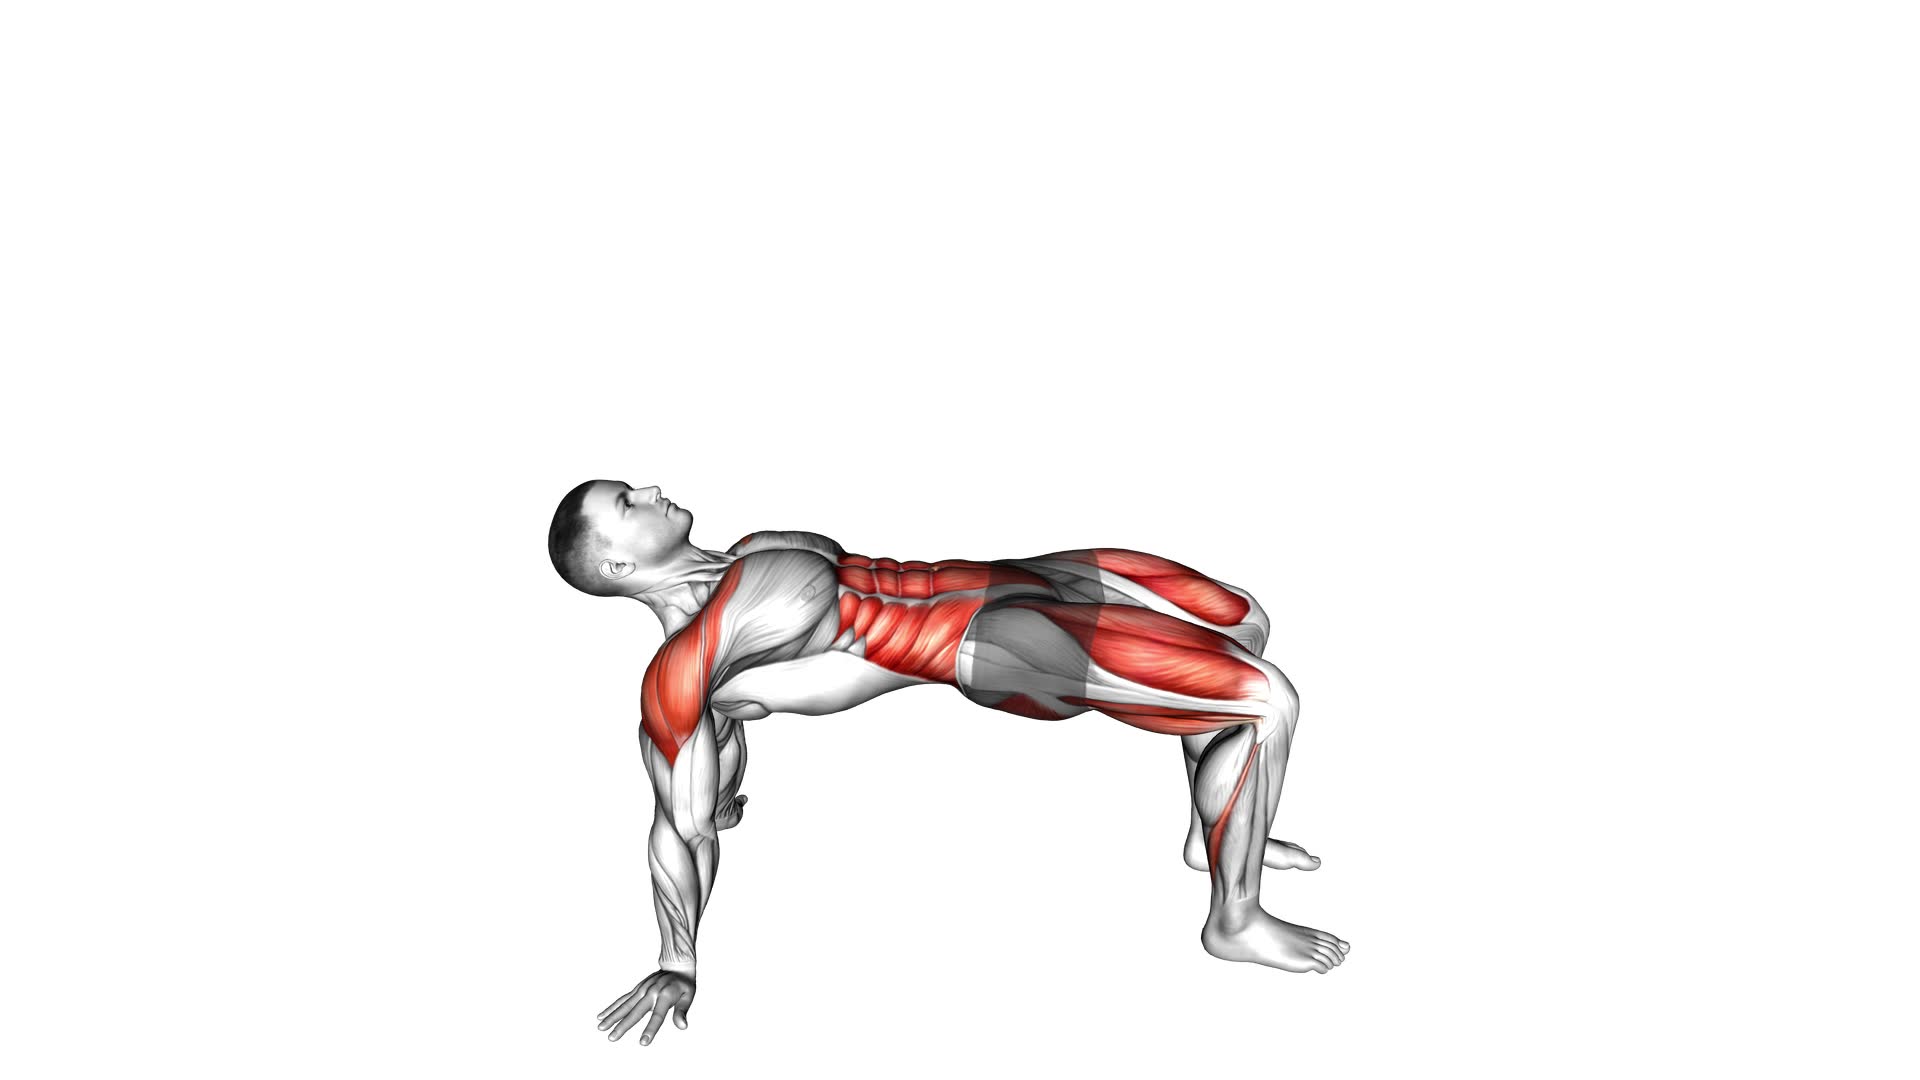 Reverse Plank With Leg Lift - Video Exercise Guide & Tips